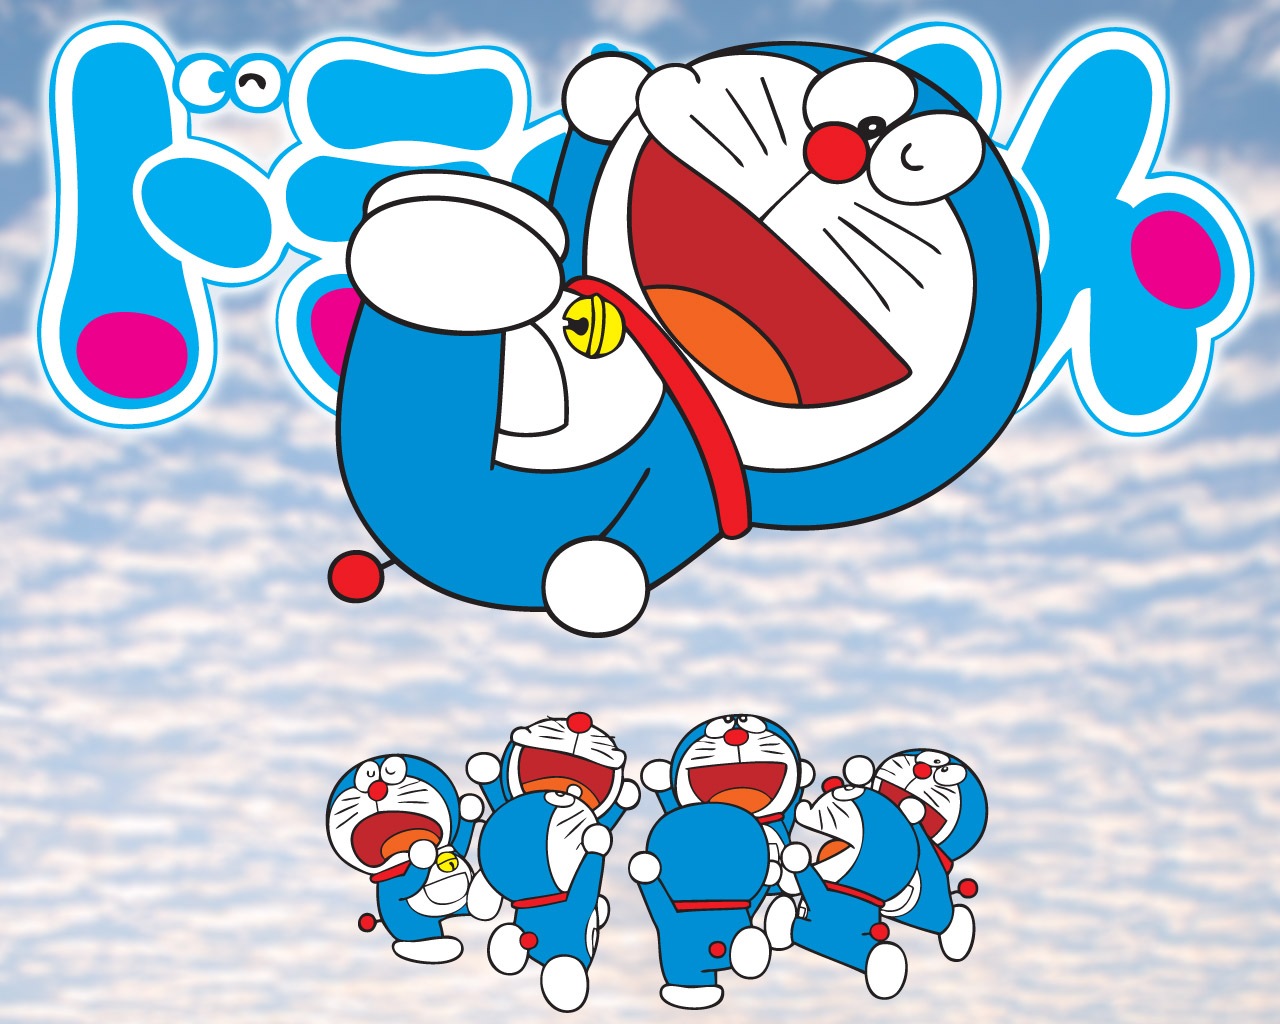 Image Doraemon Wallpaper Pc Android iPhone And iPad